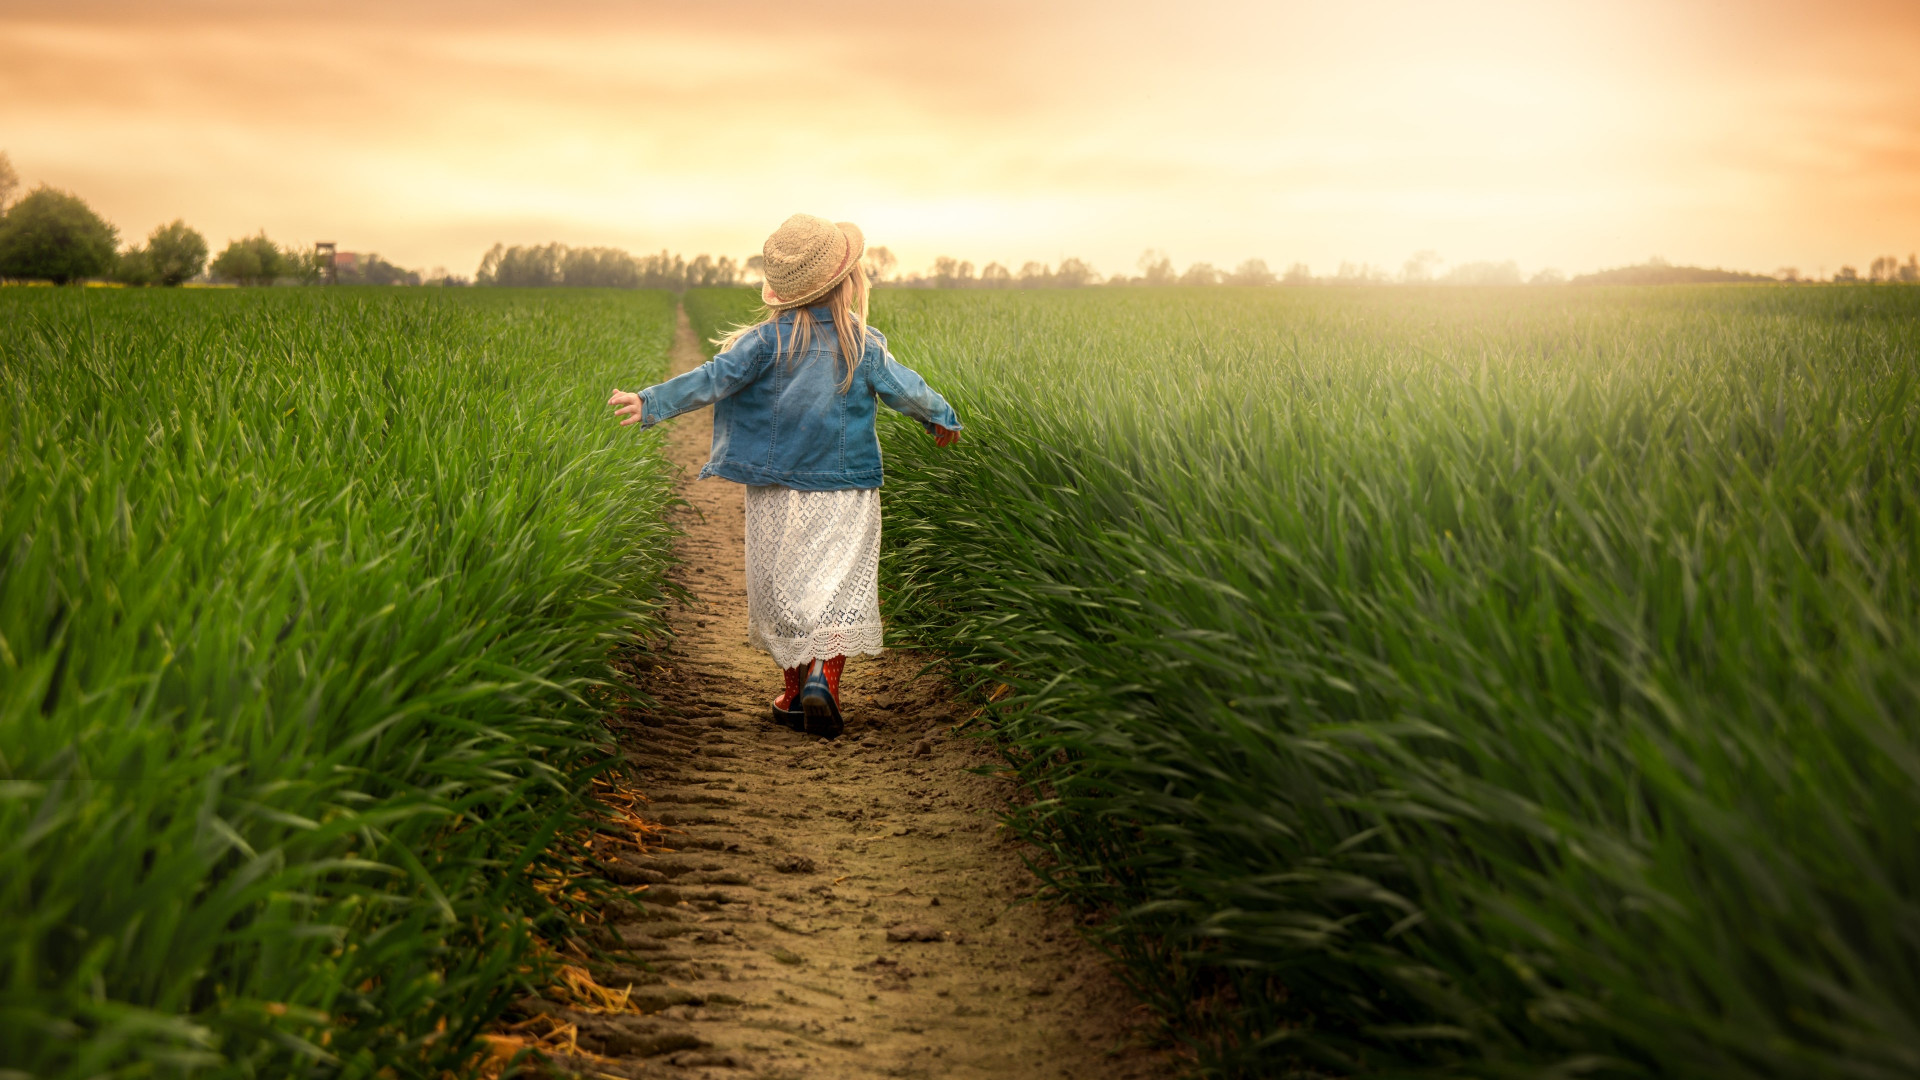 Child in the green field at sunset wallpaper 1920x1080